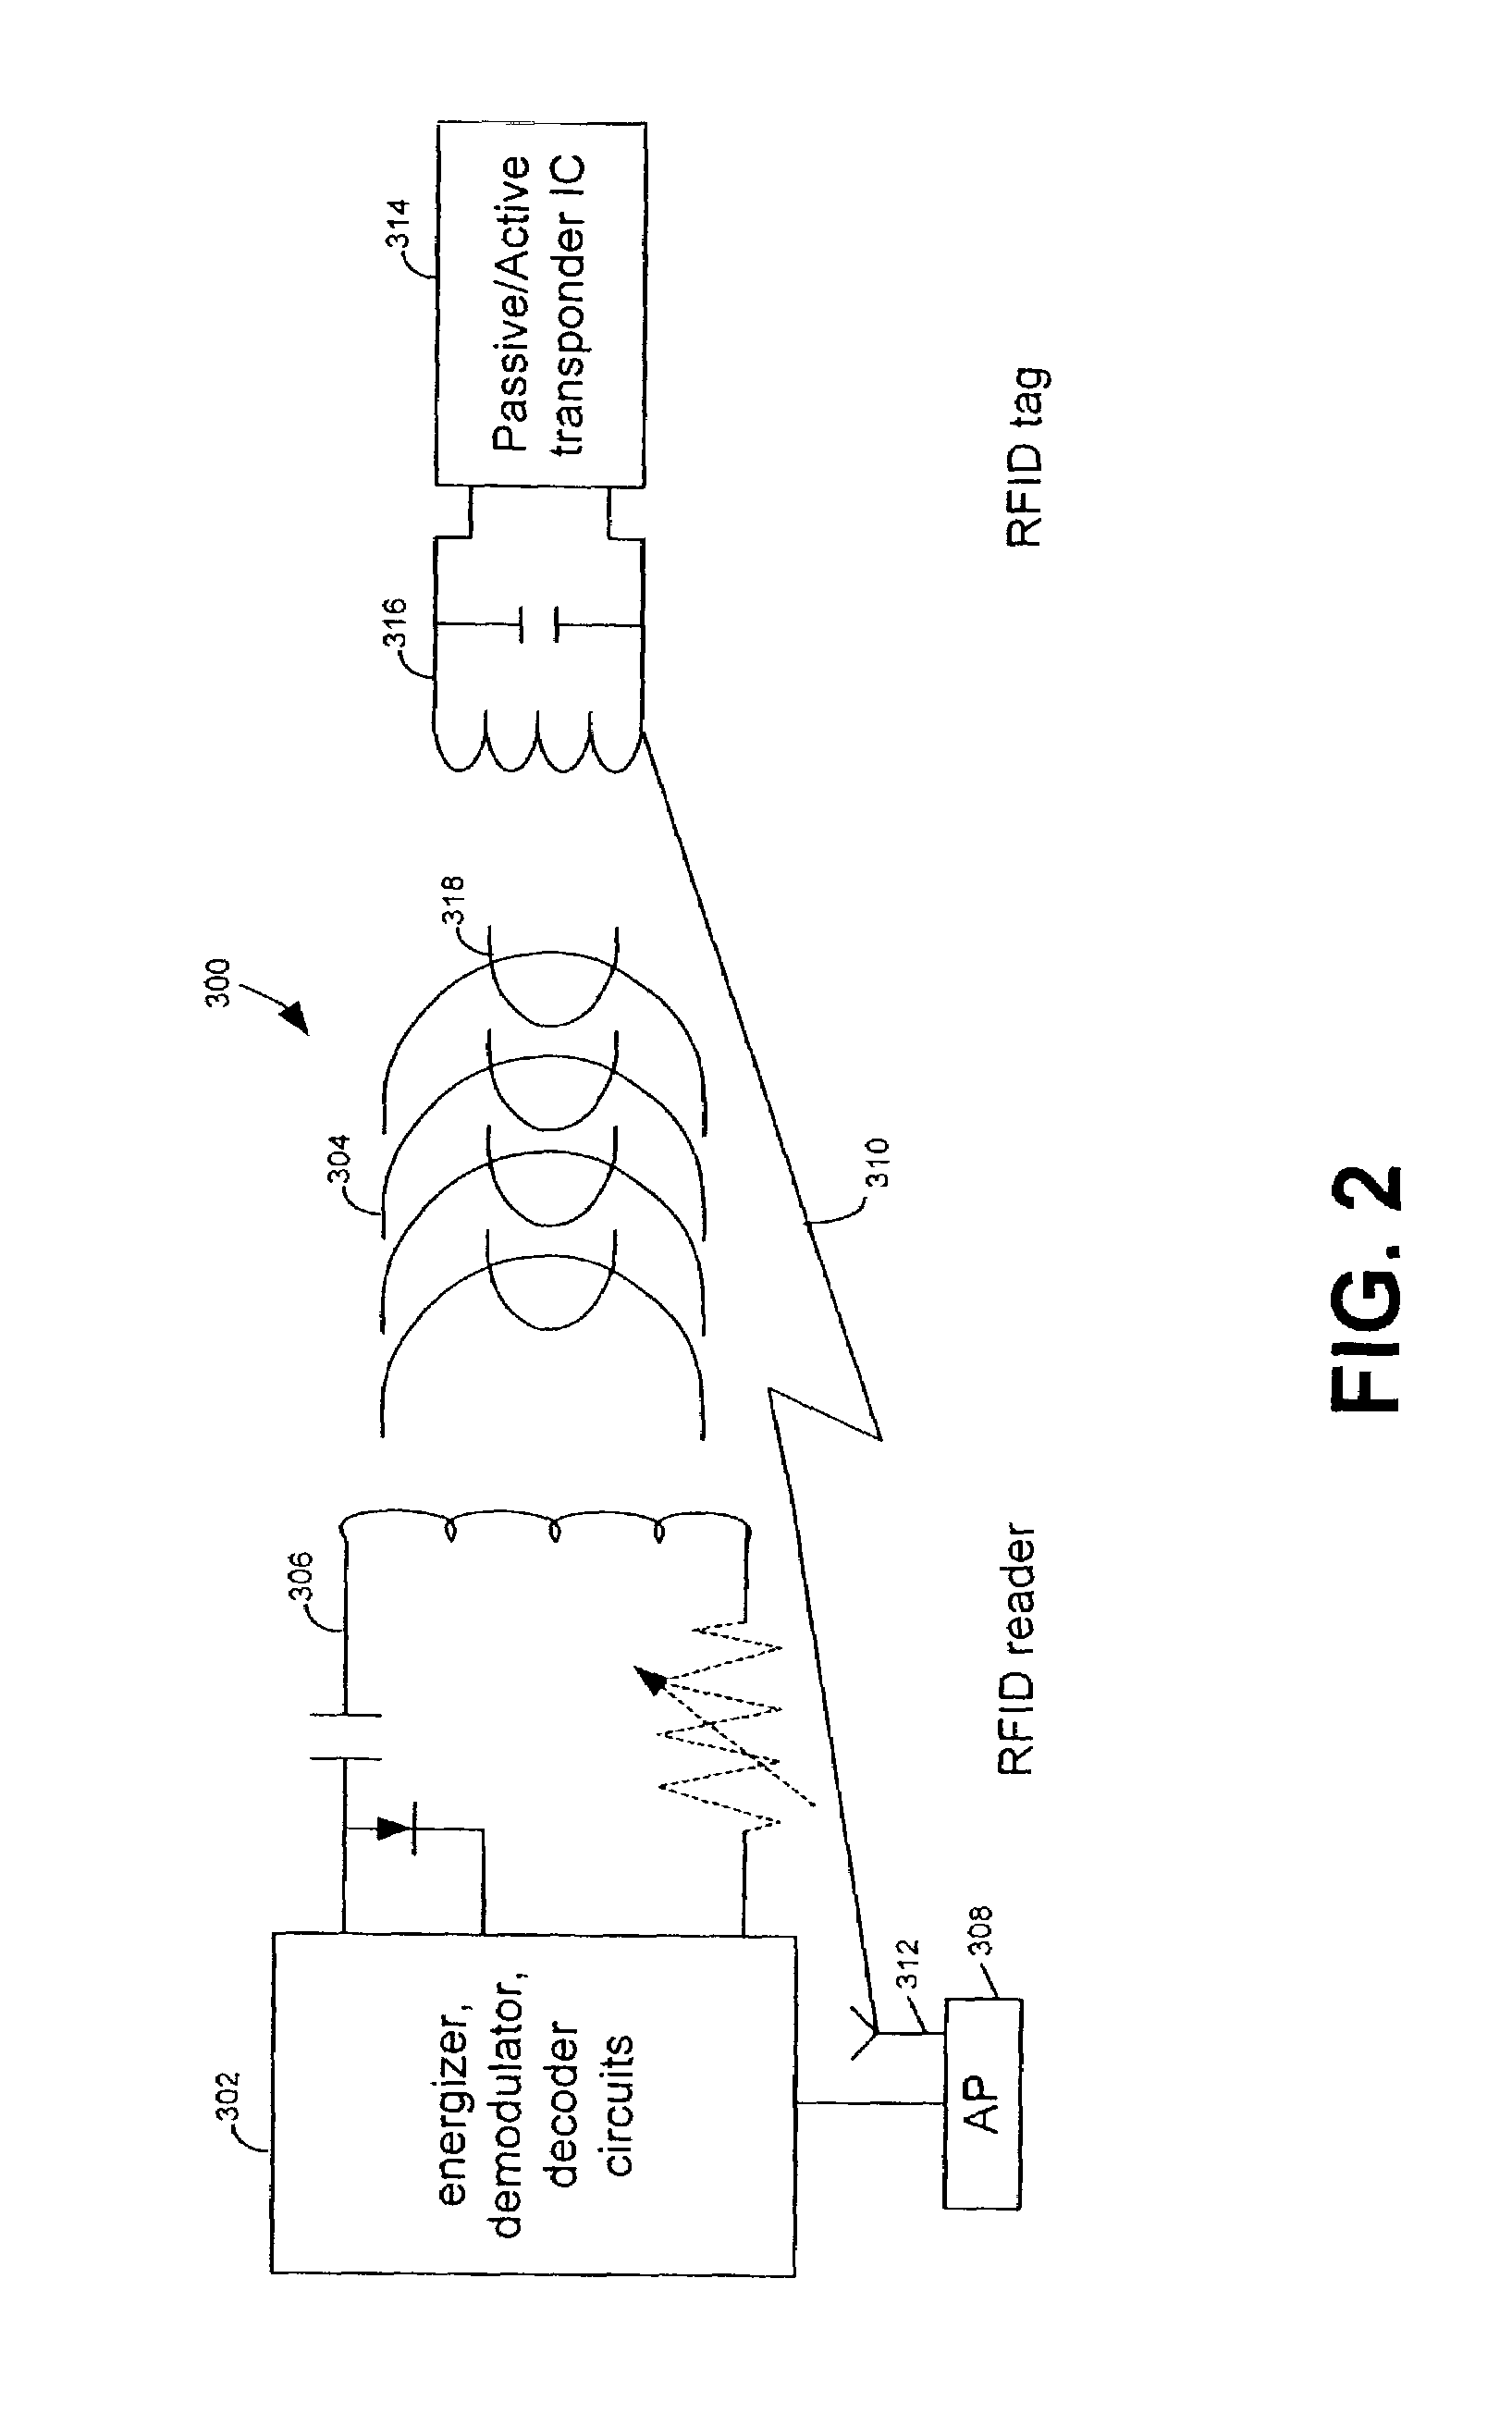 RFID device, system and method of operation including a hybrid backscatter-based RFID tag protocol compatible with RFID, bluetooth and/or IEEE 802.11x infrastructure